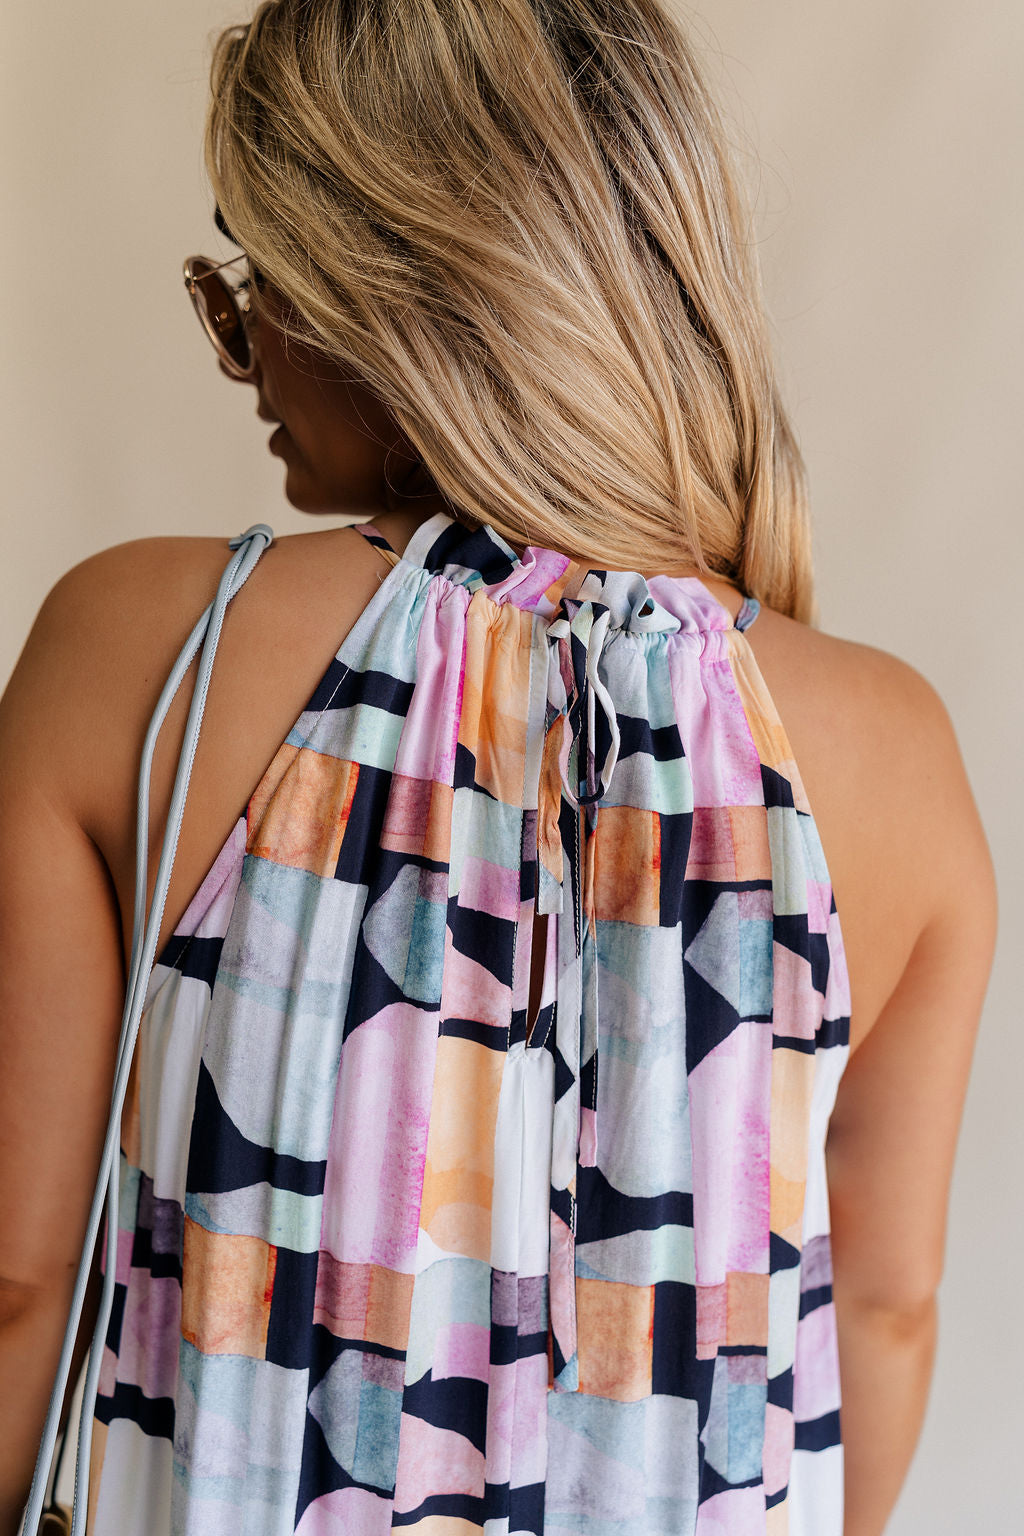 Back view of female model wearing the Emily Black Multi Geometric Halter Maxi Dress which features Black, Blue, Orange, Pink and White Lightweight Fabric, Geometric Pattern, Maxi Length, White Thigh Length Lining, Ruffle Hem and Halter Neckline with Back Tie Strap